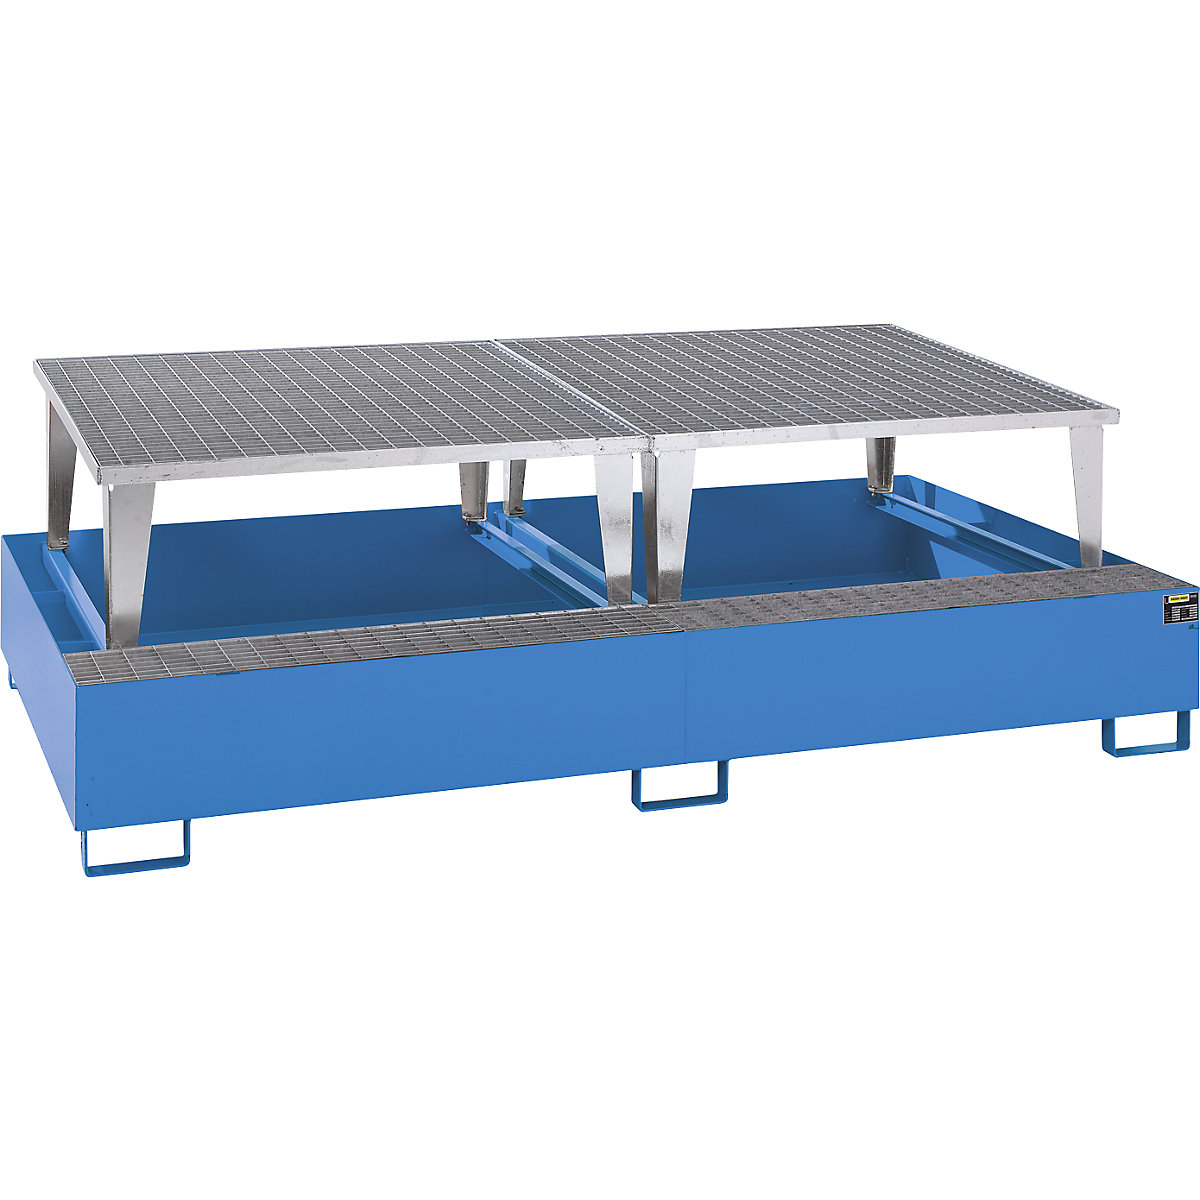 Steel sump tray for IBC/CTC tank containers – eurokraft pro